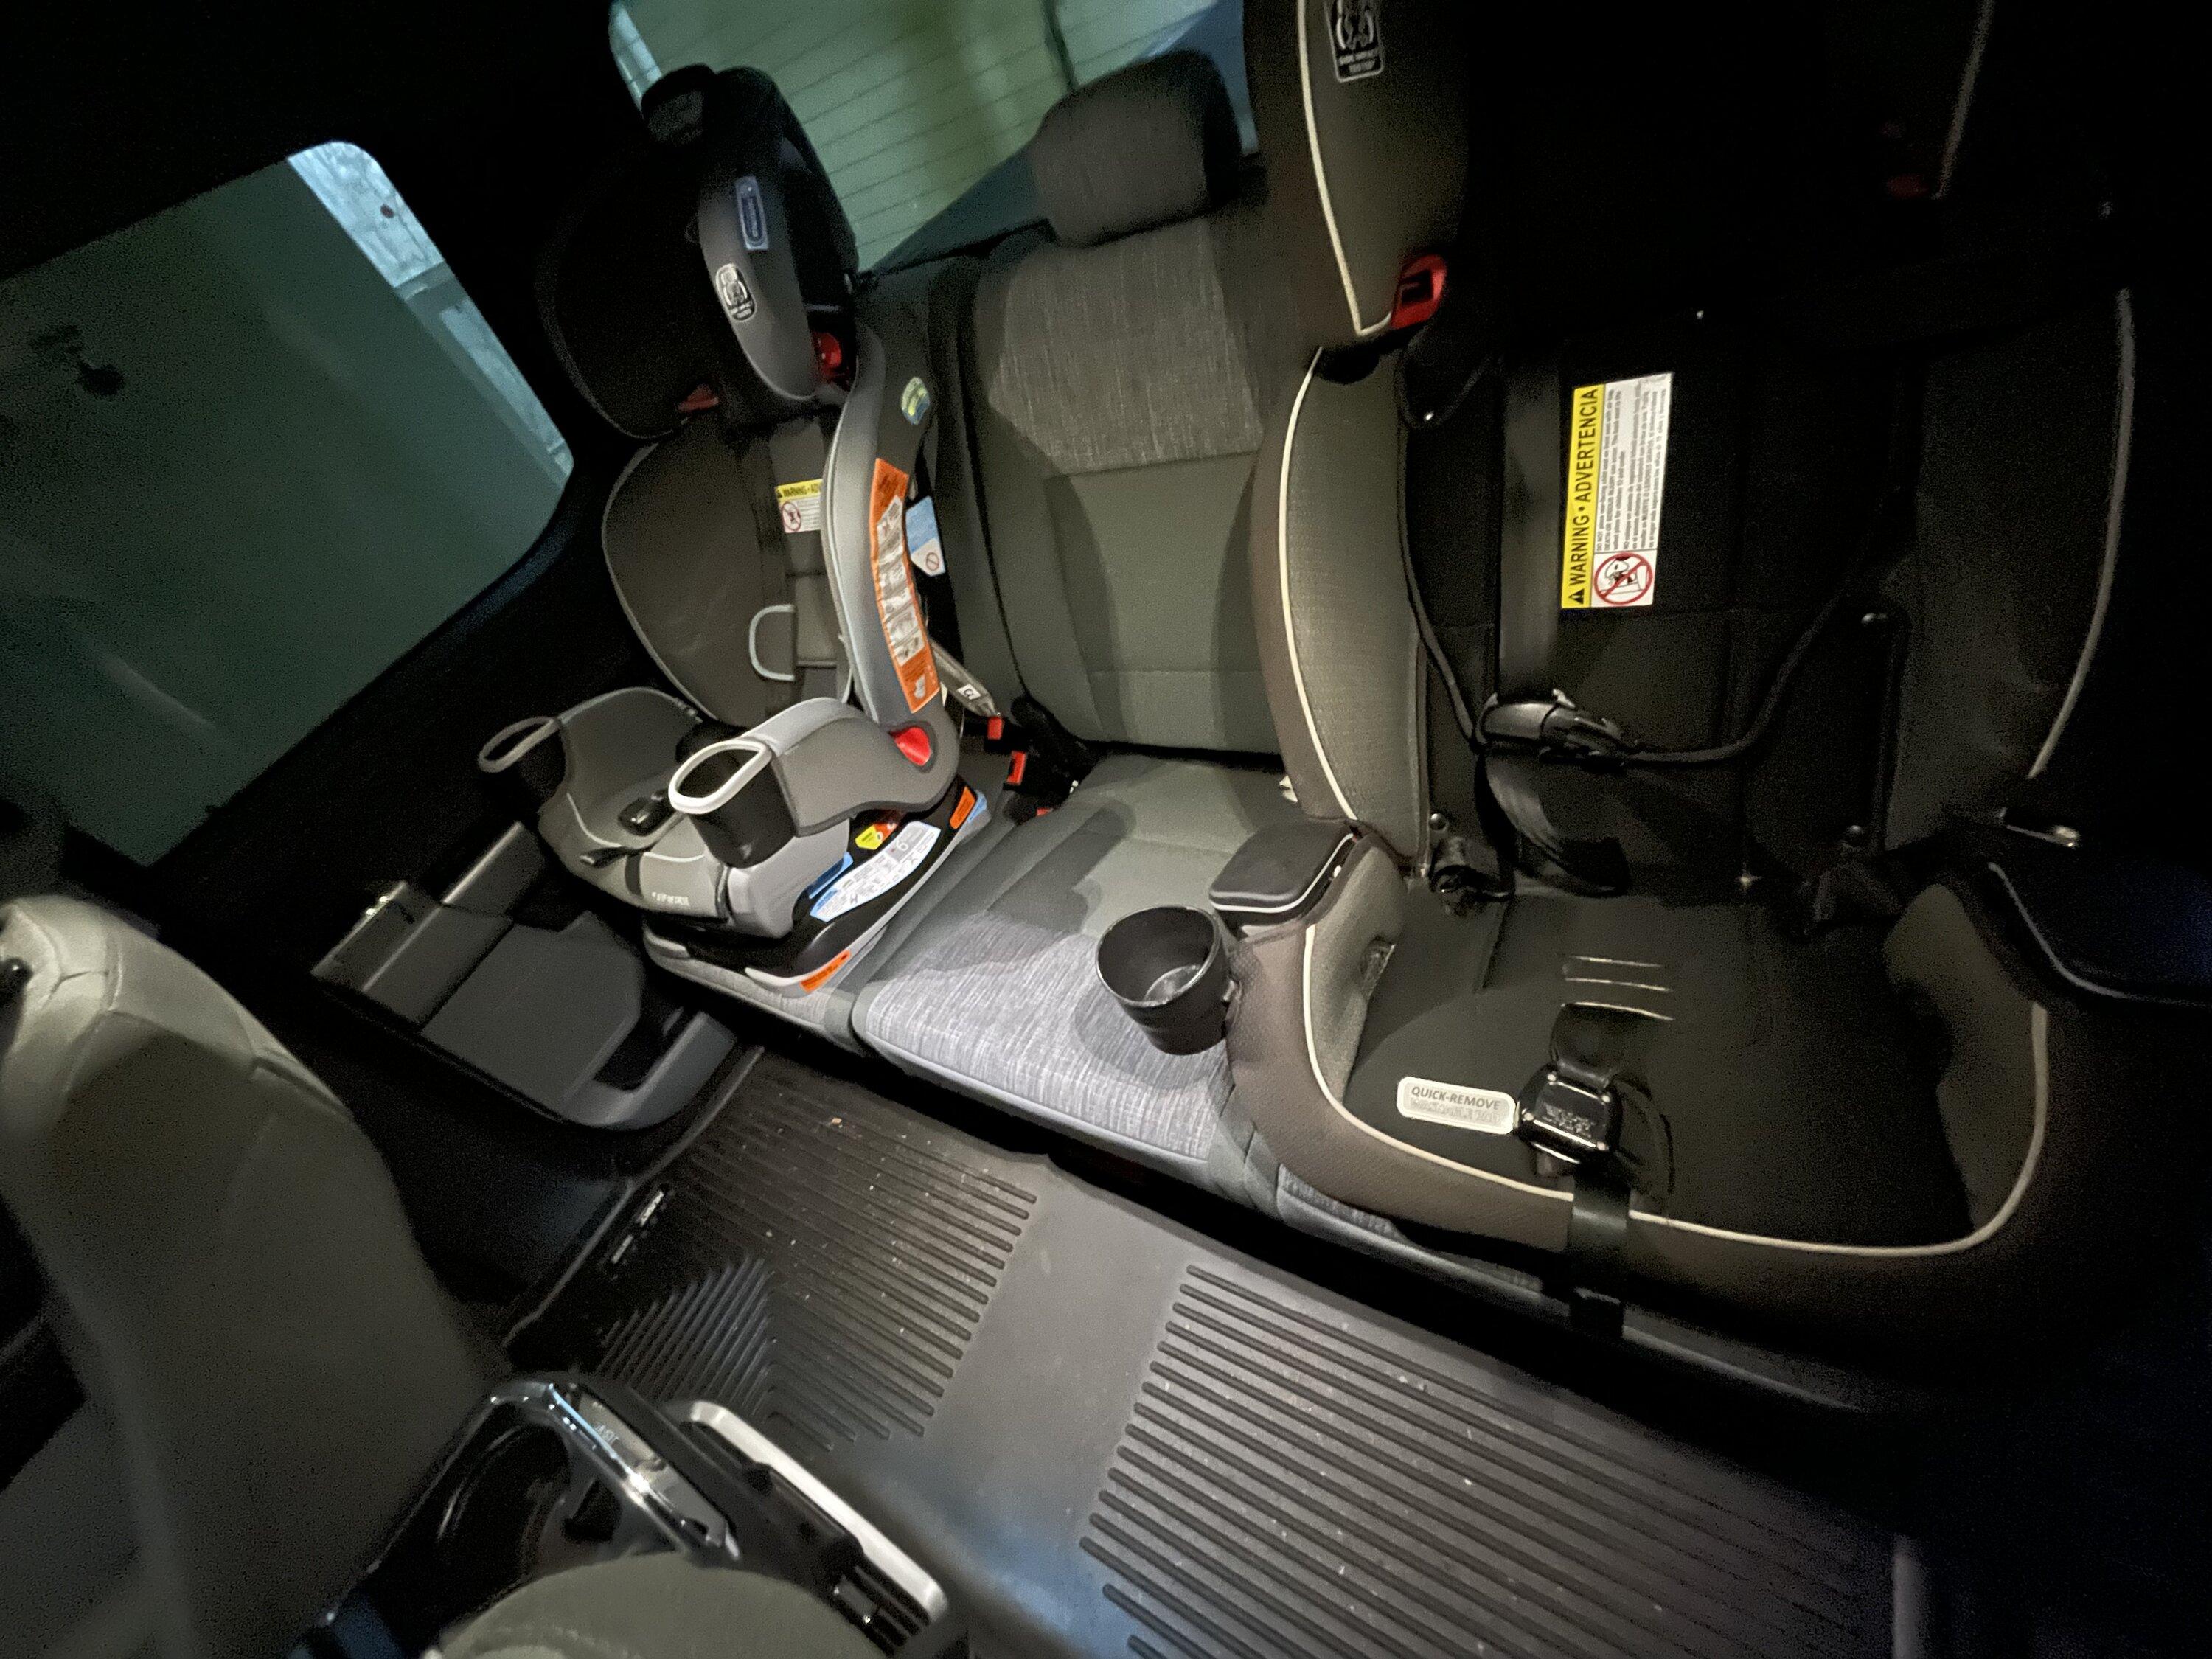 Spacing and/or pictures of 2 child seats?  Ford Lightning Forum For F-150  Lightning EV Pickup: News, Owners, Discussions, Community